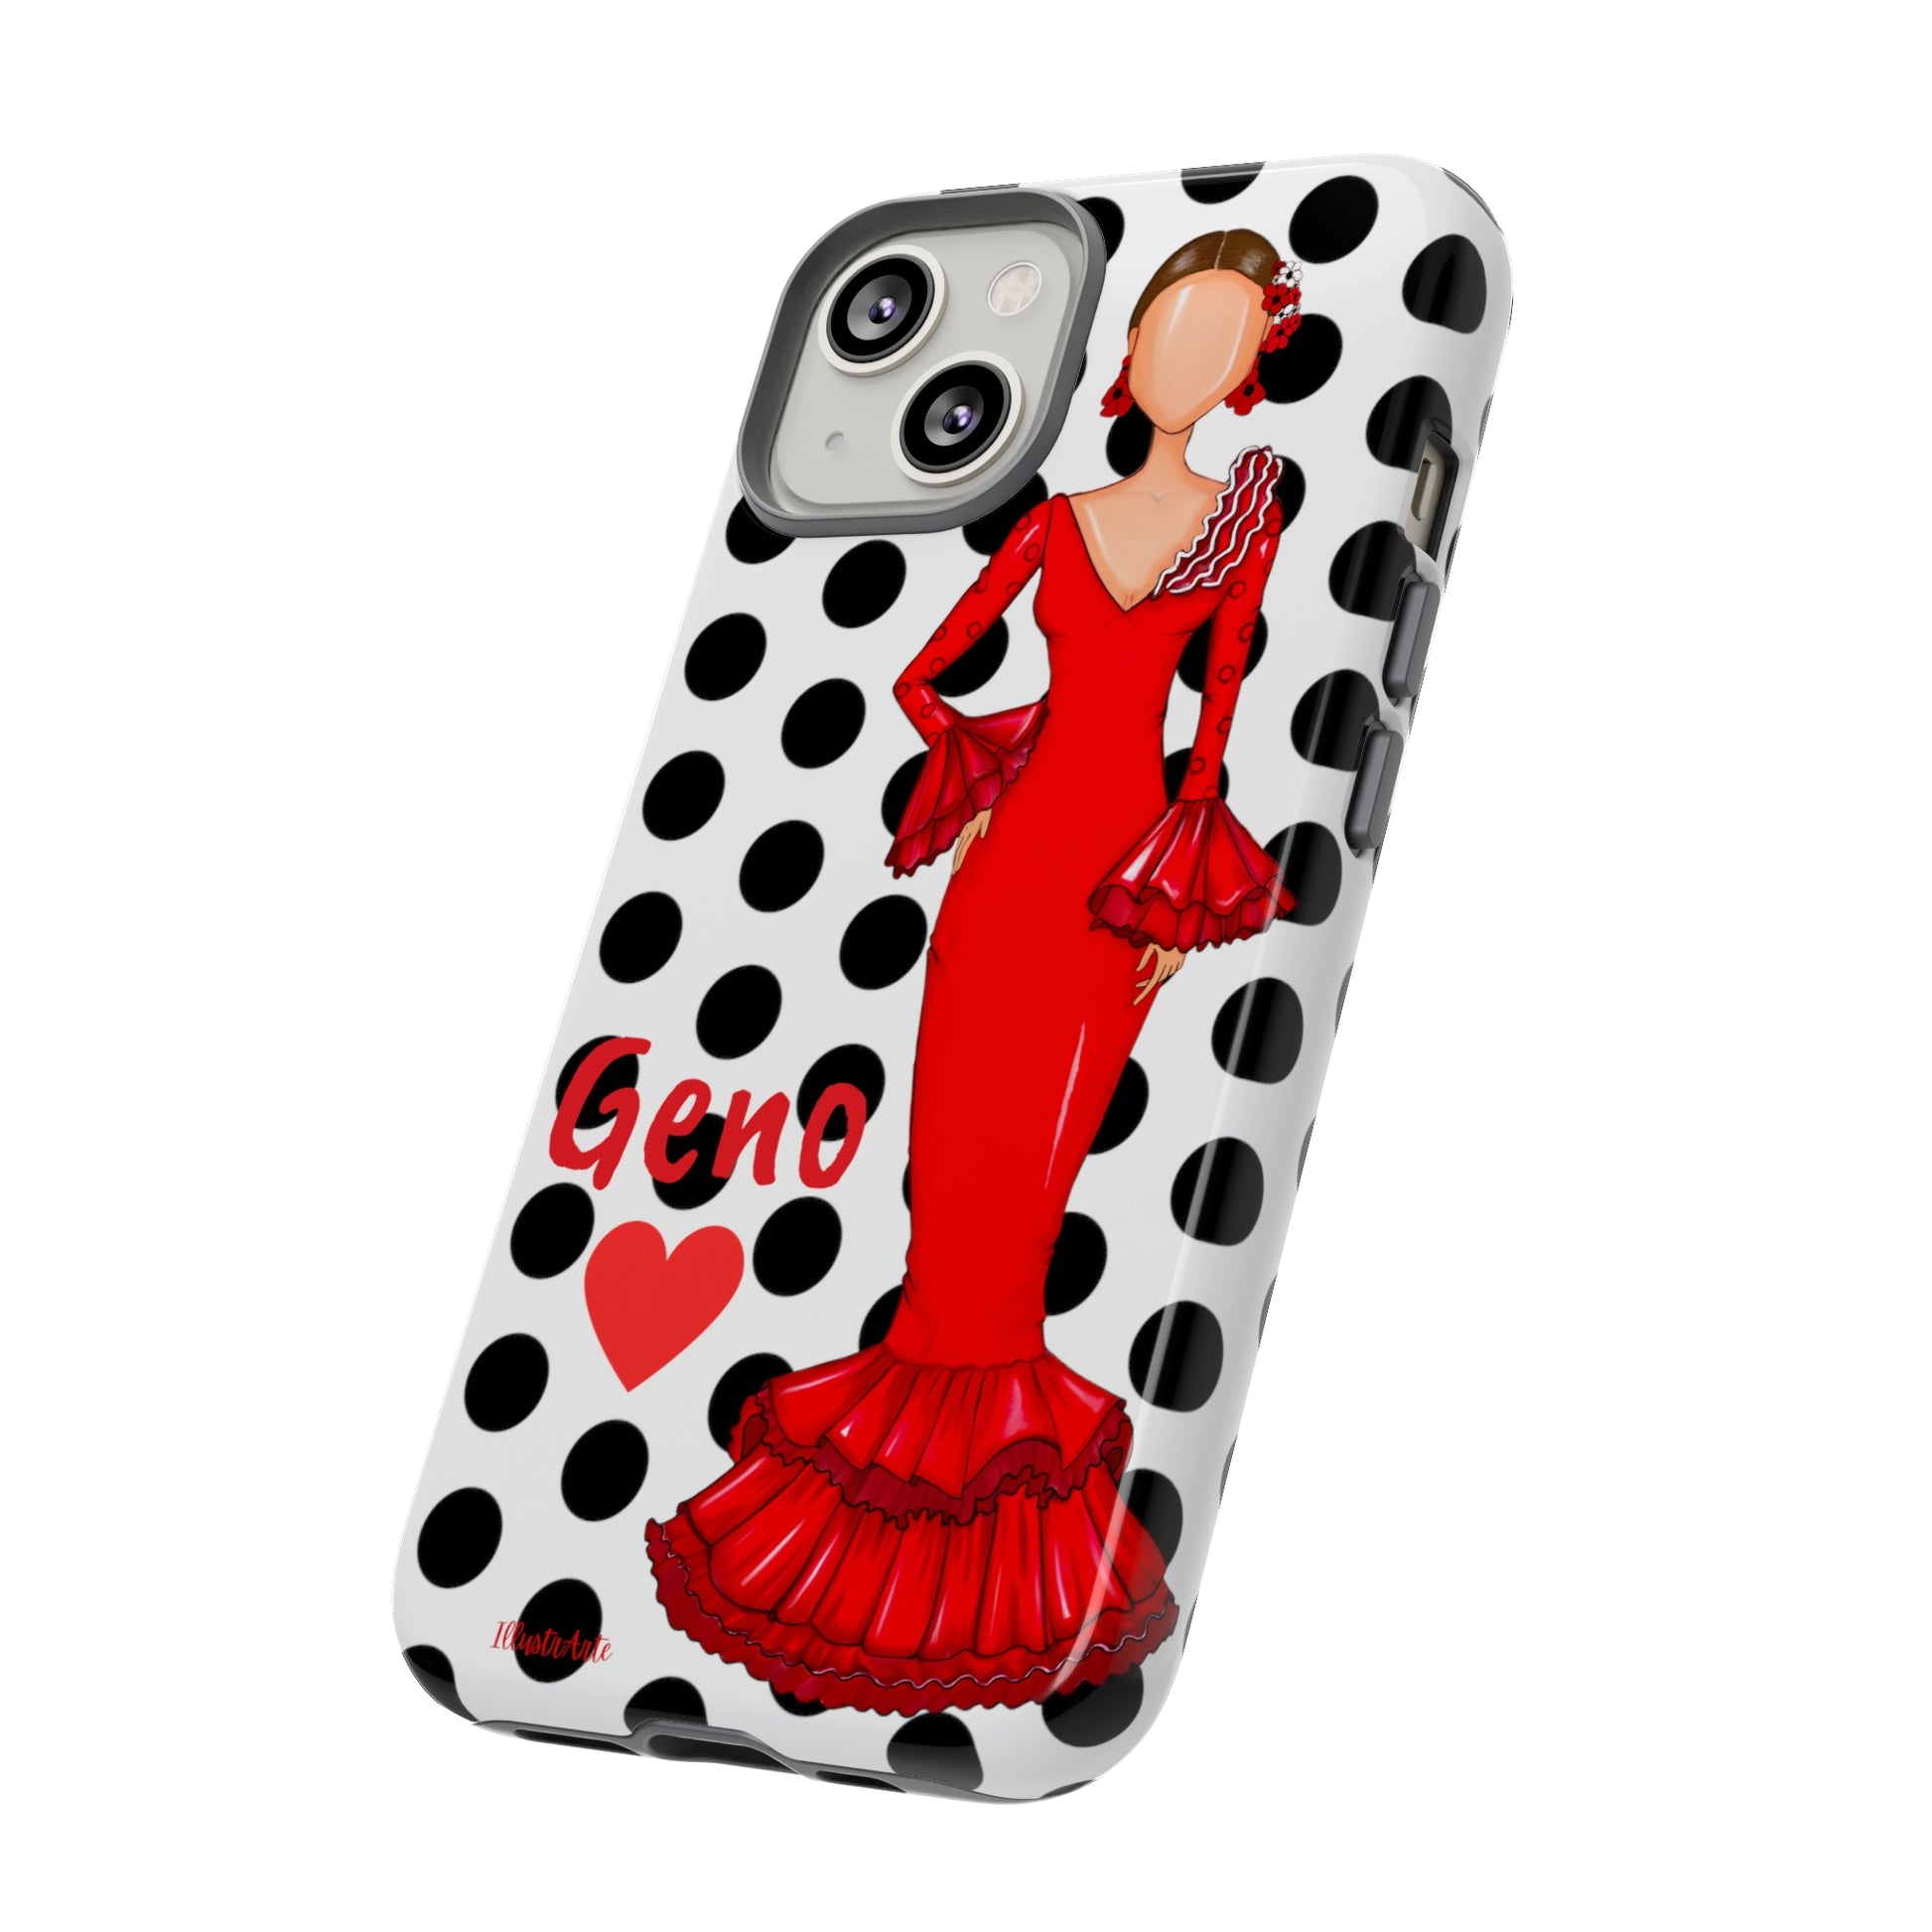 a cell phone case with a woman in a red dress